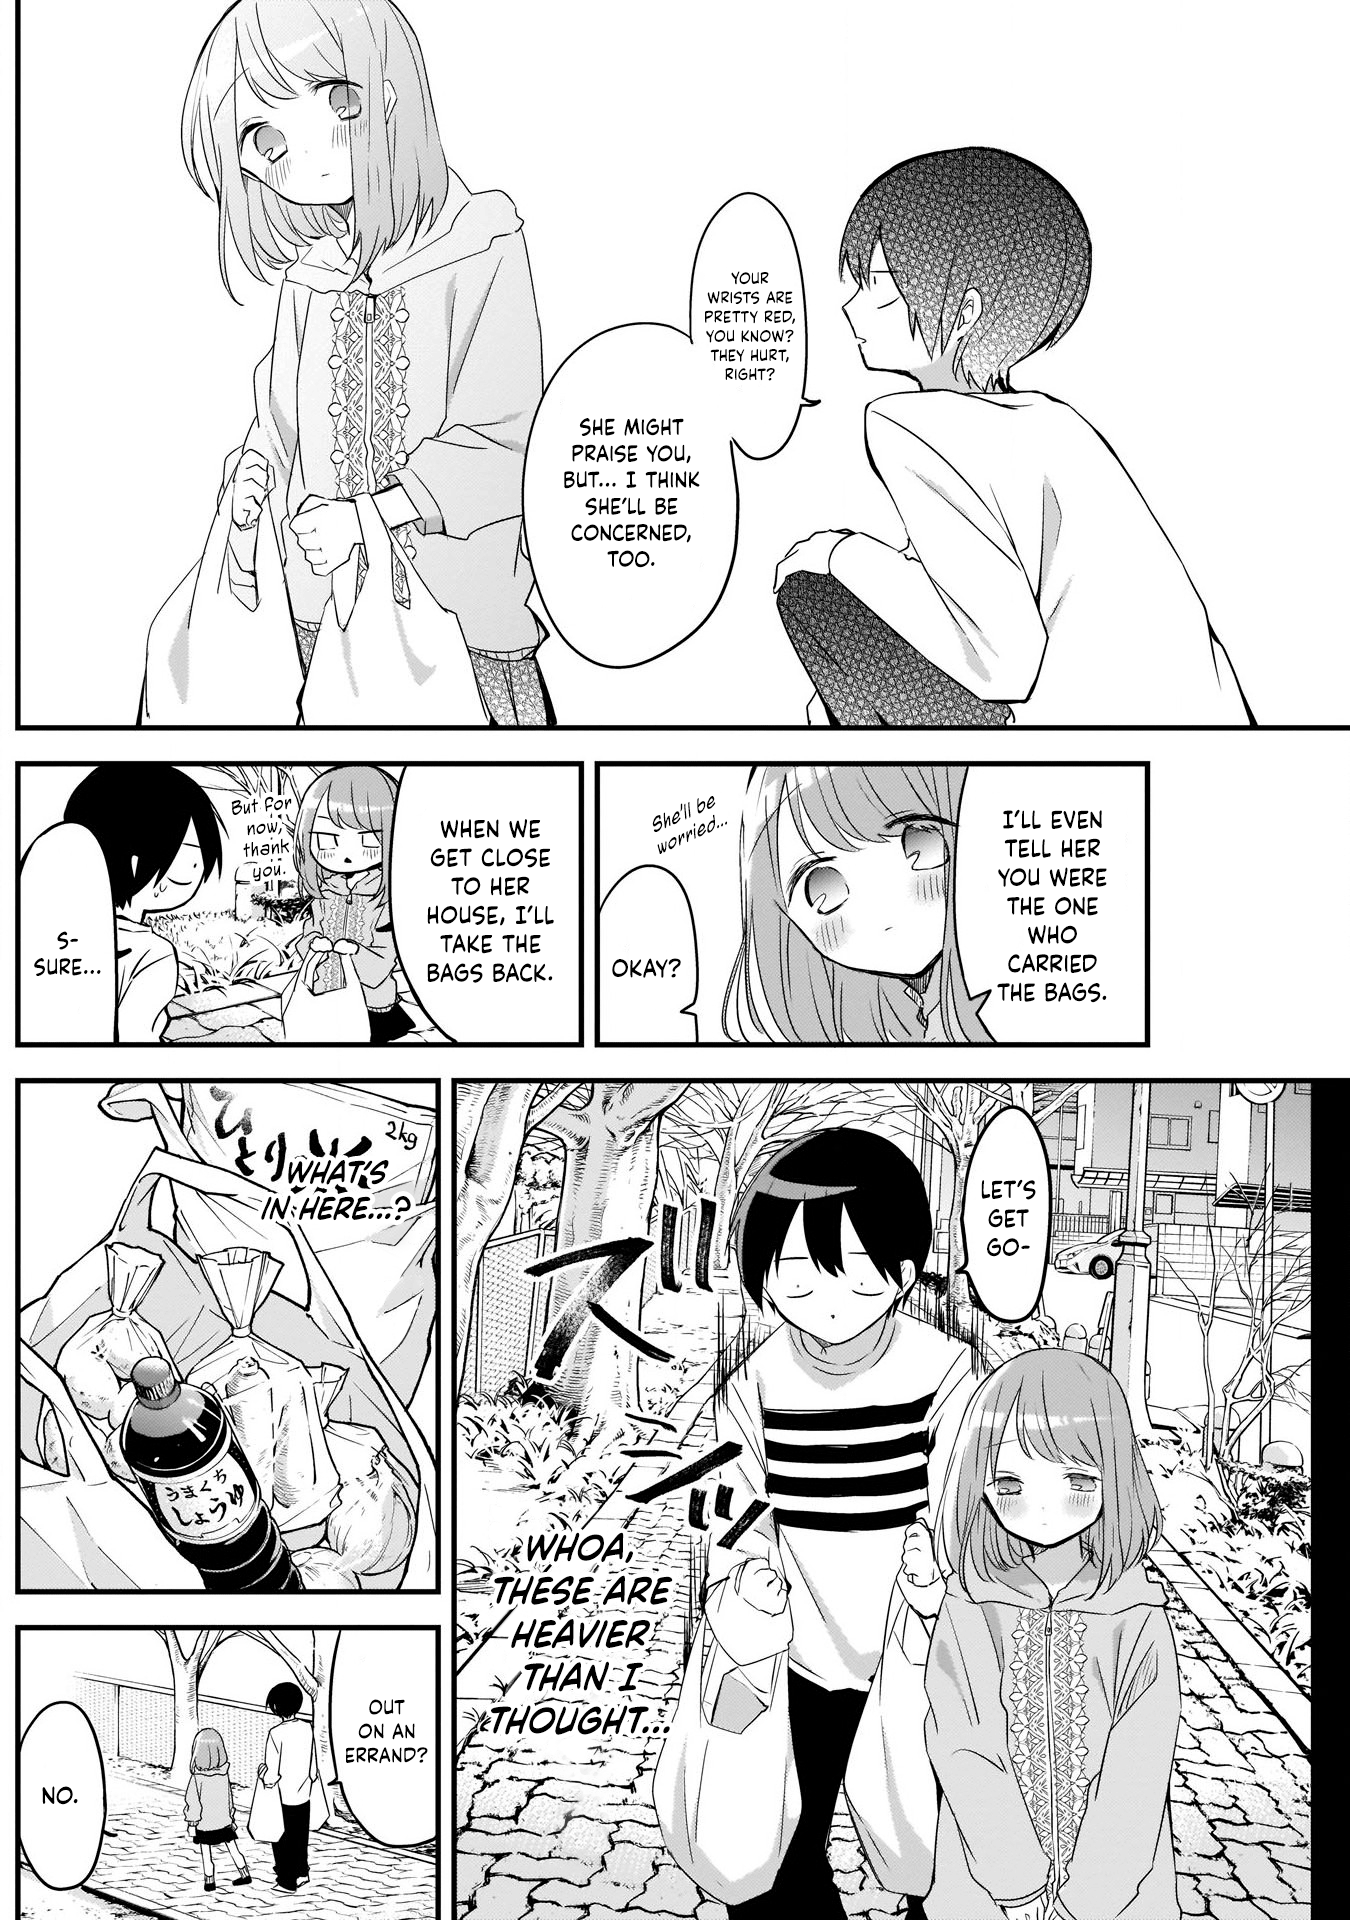 Kubo-San Doesn't Leave Me Be (A Mob) - Page 4